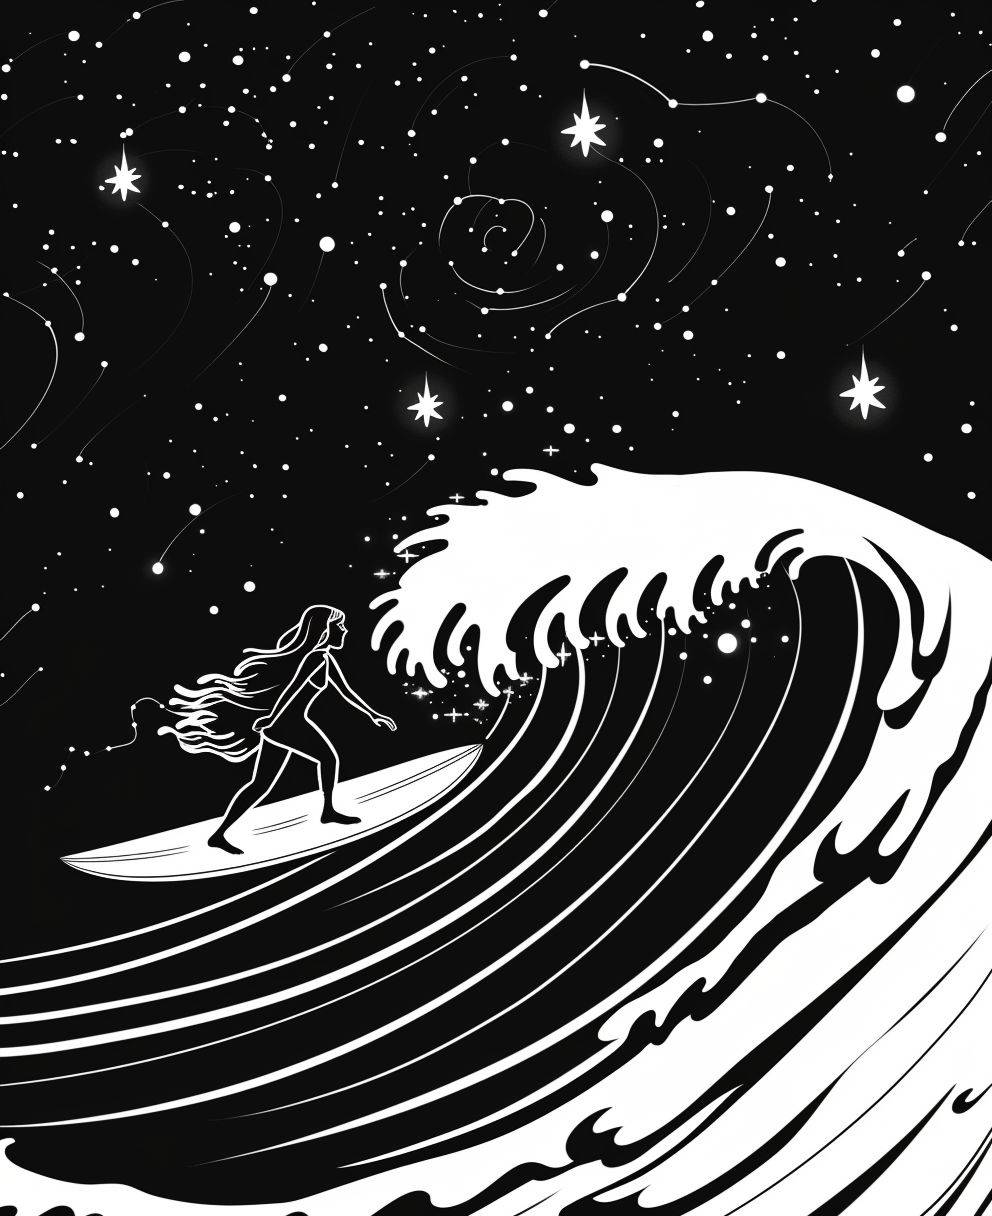 Illustrate a Girl on a surfboard surfing some surreal waves, stars shining bright in the background, cartoon style, thick lines, low detail, no shading, no colours